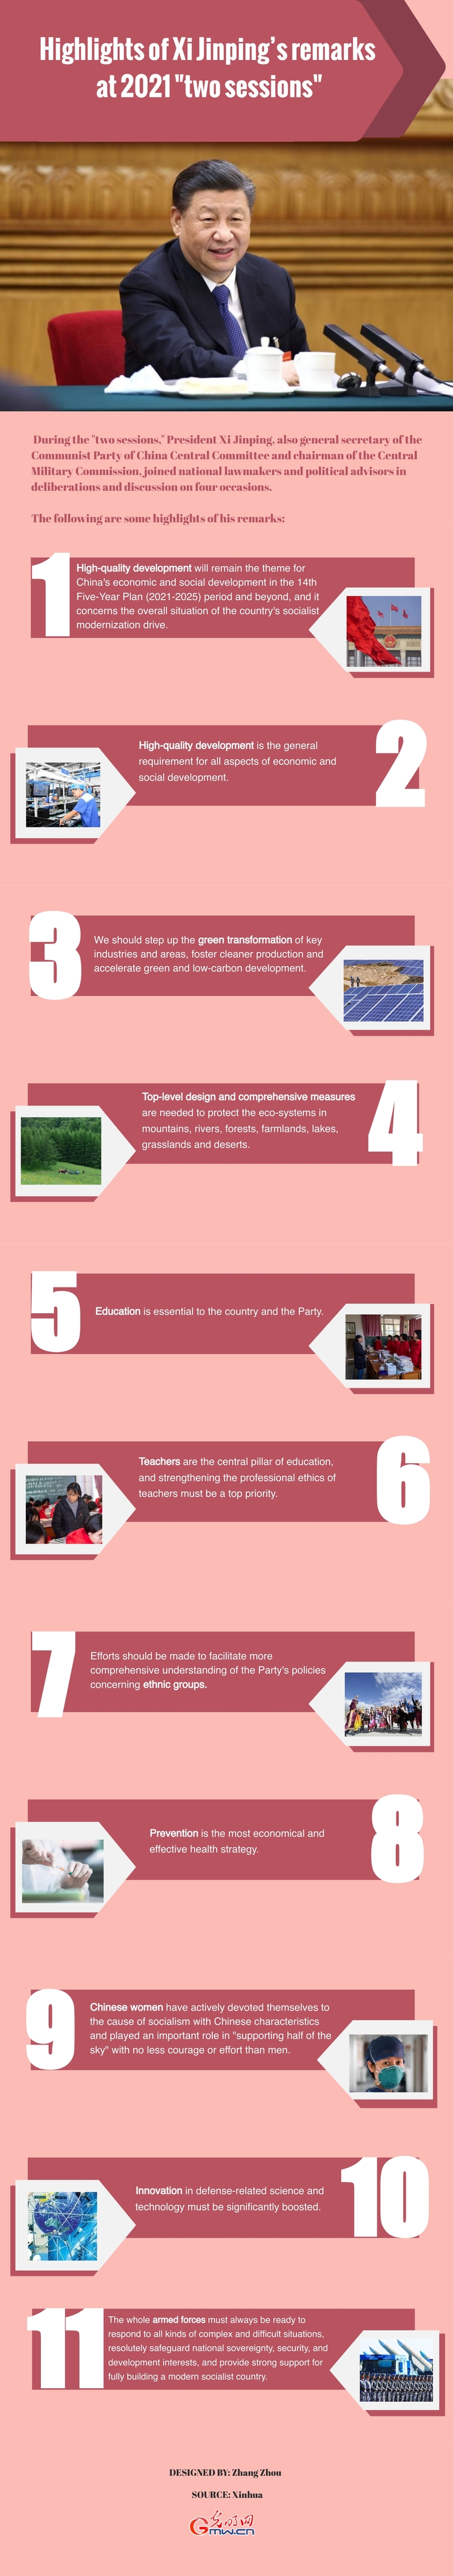 Infographic: Highlights of Xi Jinping’s remarks at 2021 